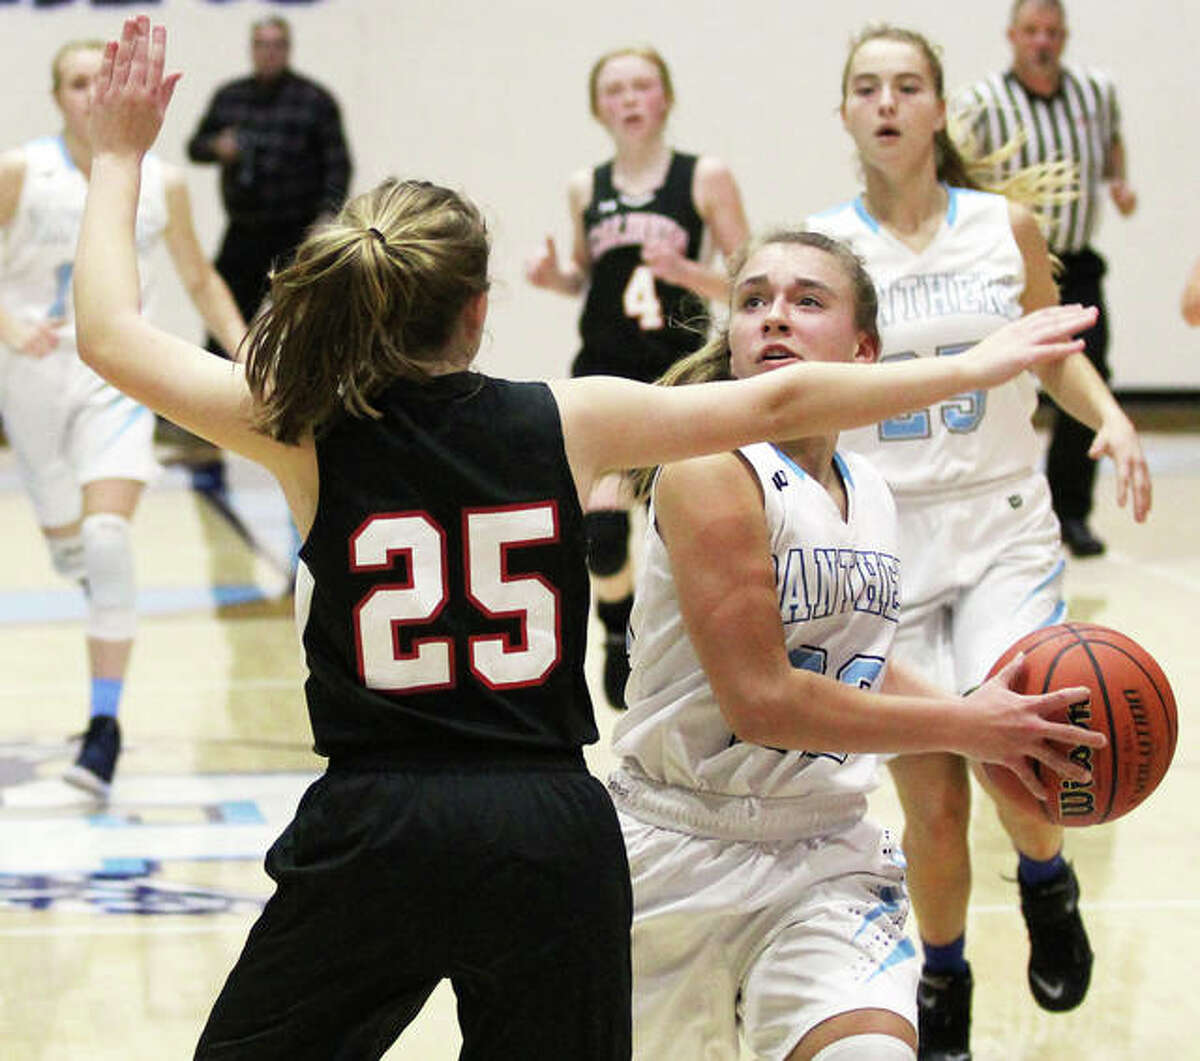 Jersey’s Clare Breden goes up to score over Calhoun’s Ashleigh Presley (25) in a Jersey Tourney game Dec. 27 in Jerseyville. Breden scored 21 points Saturday in a Panthers victory at the Breese Central Shootout.